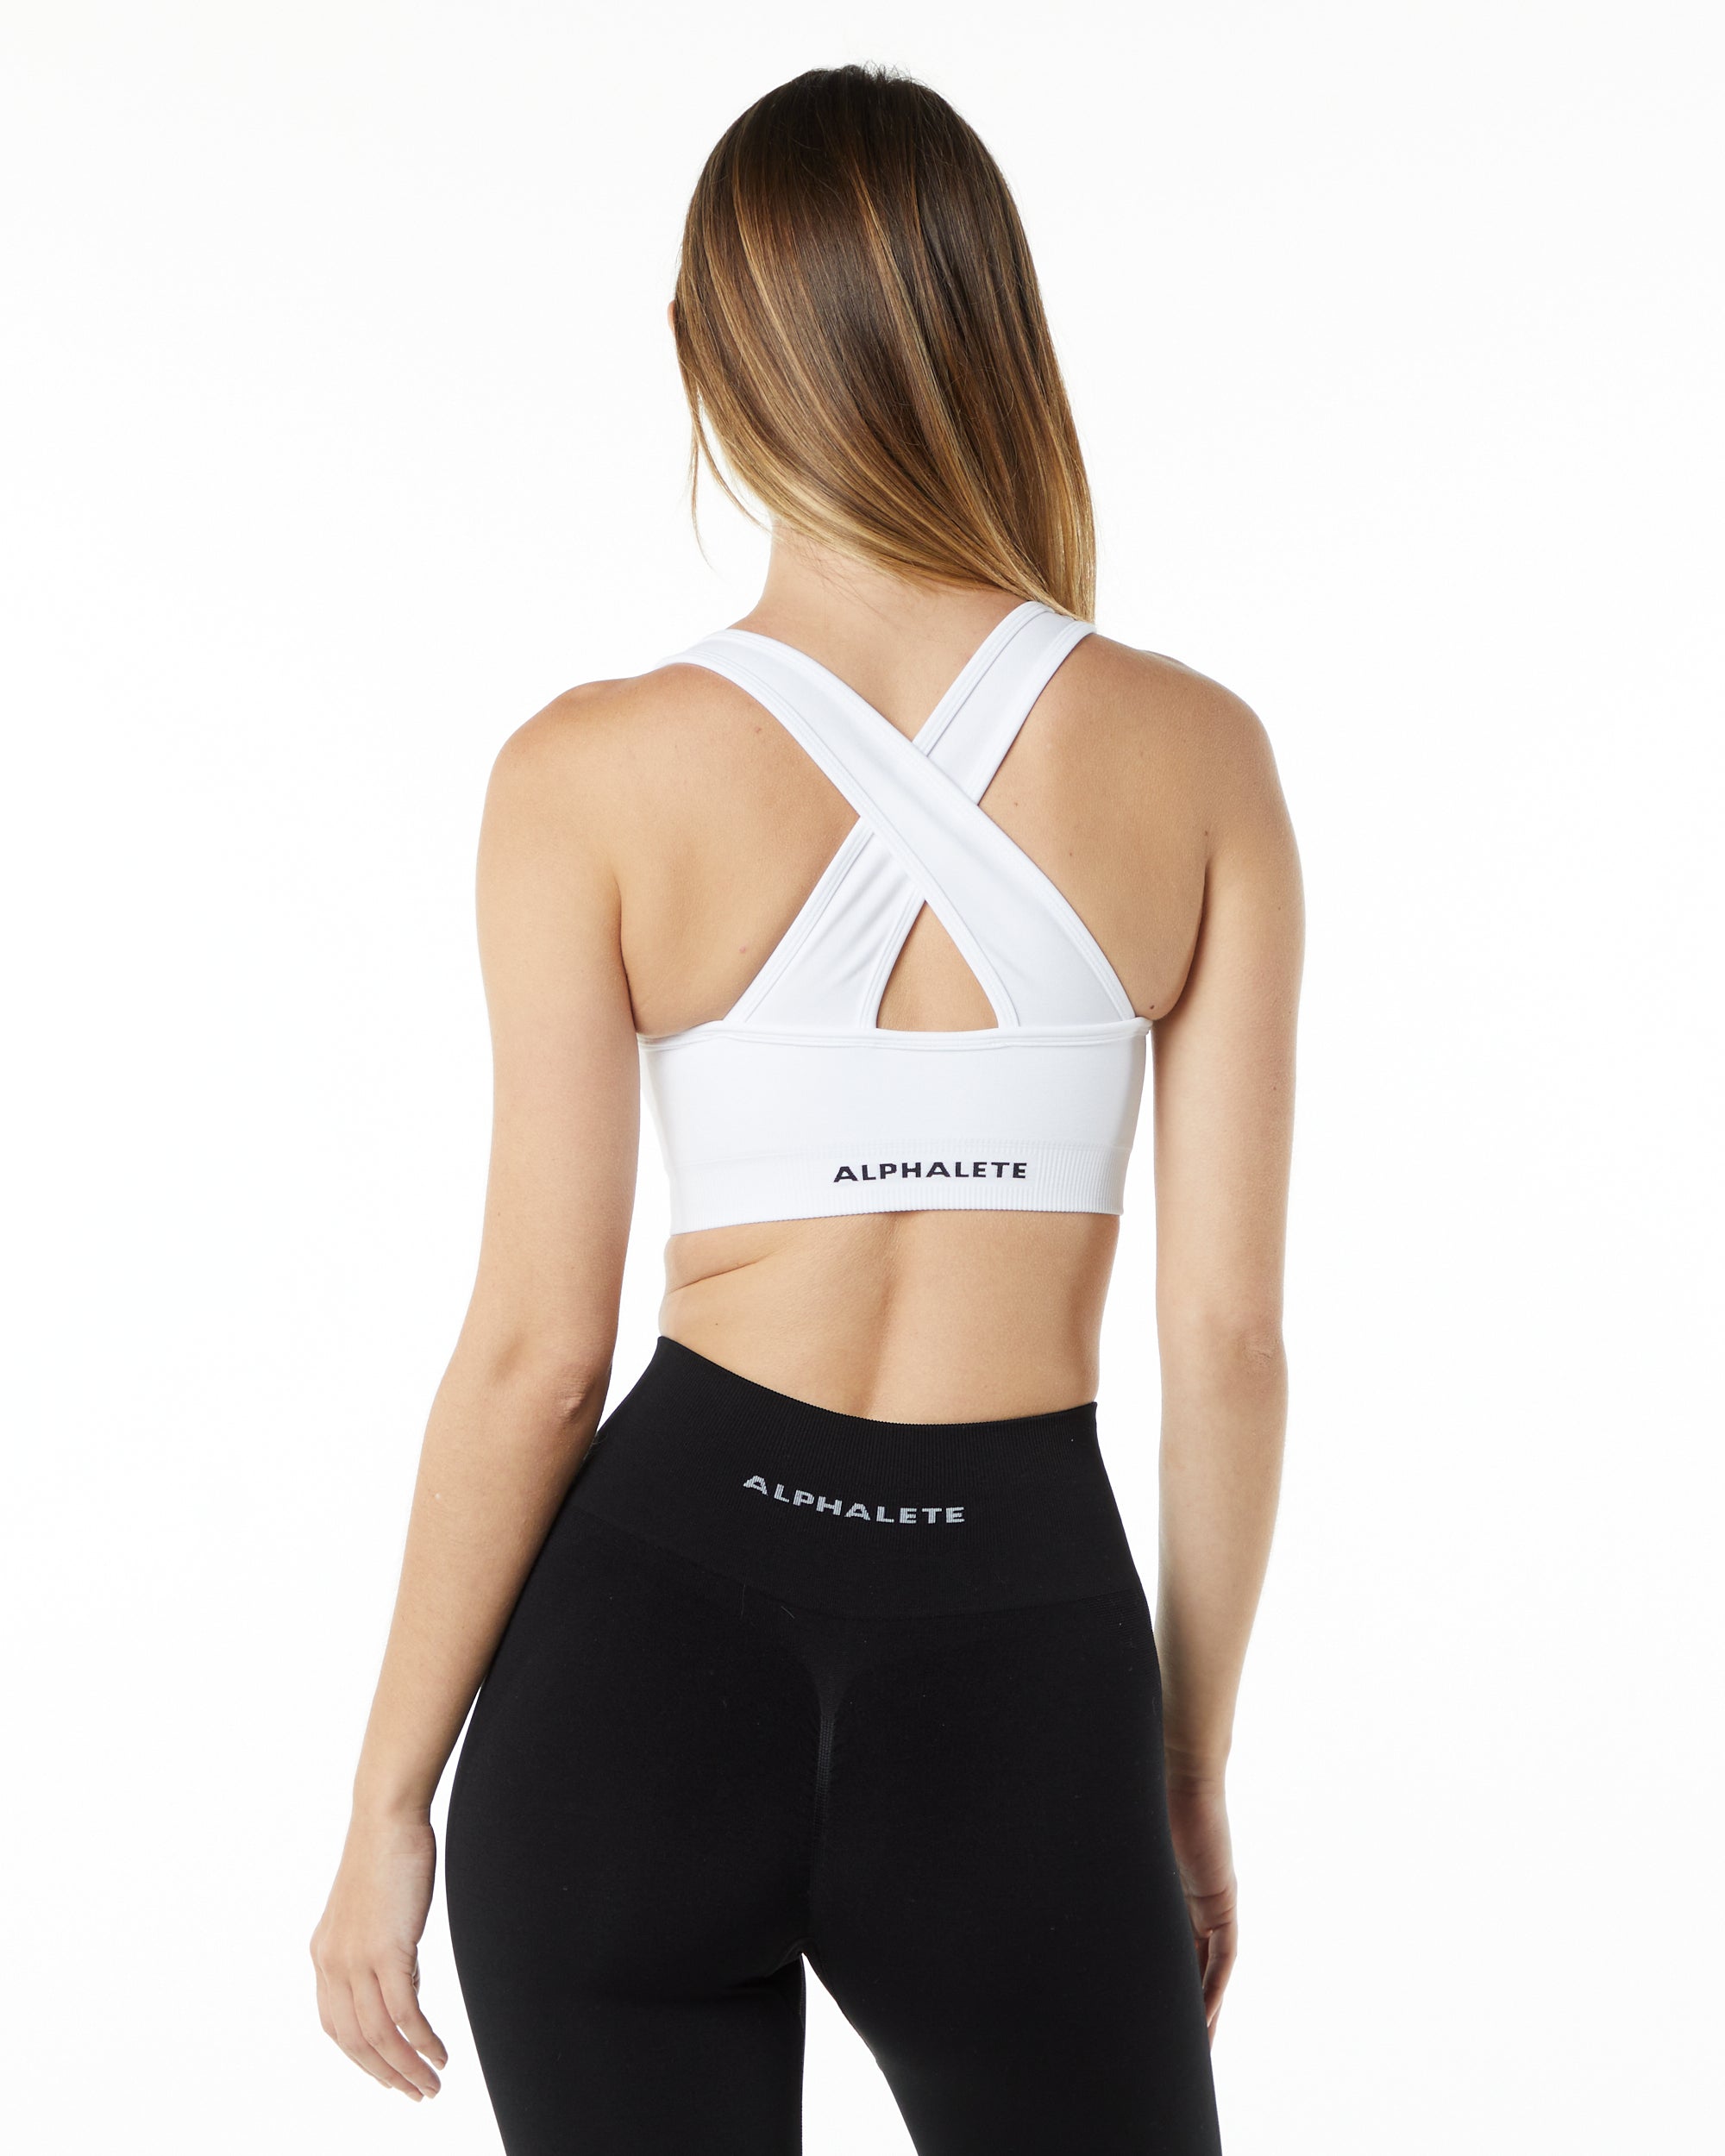 alphalete on X: AMPLIFY x FORMULA RED🏎 This Saturday at 12pm CST · Amplify  4.5” Short · Amplify Legging · Amplify Bra (also coming in white) · Amplify  Long Sleeve Crop  / X